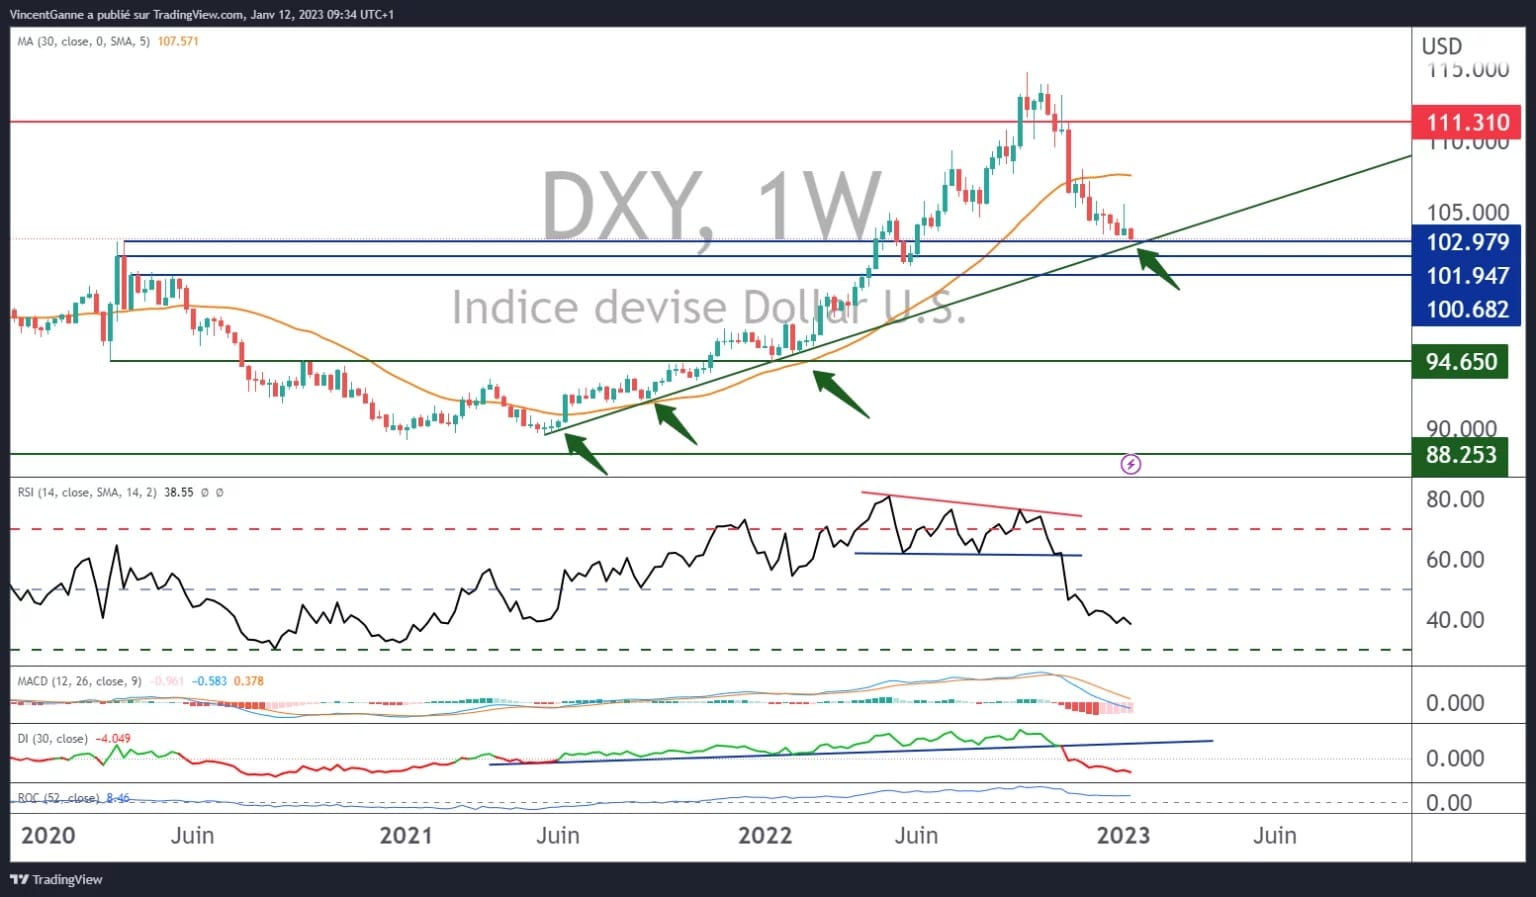 Chart showing the weekly Japanese candlestick pattern of the US dollar (DXY) against a basket of major Forex currencies